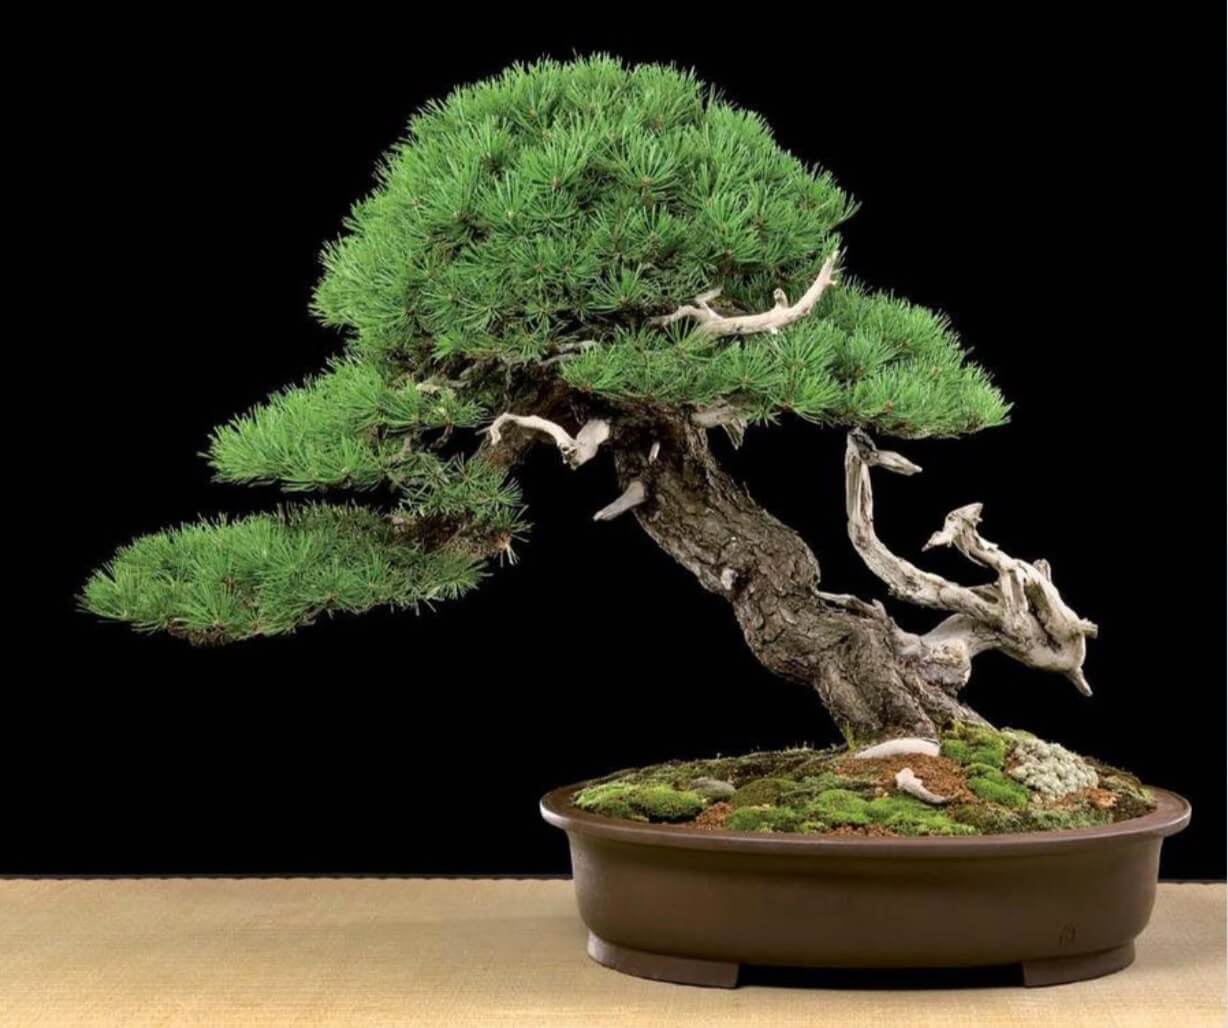 Pinus mugo, Height: 100 cm / 391⁄4". Very classically styled, a slanting pine with a dramatic sweeping branch to the left, counter balanced by the jin at the base to the right